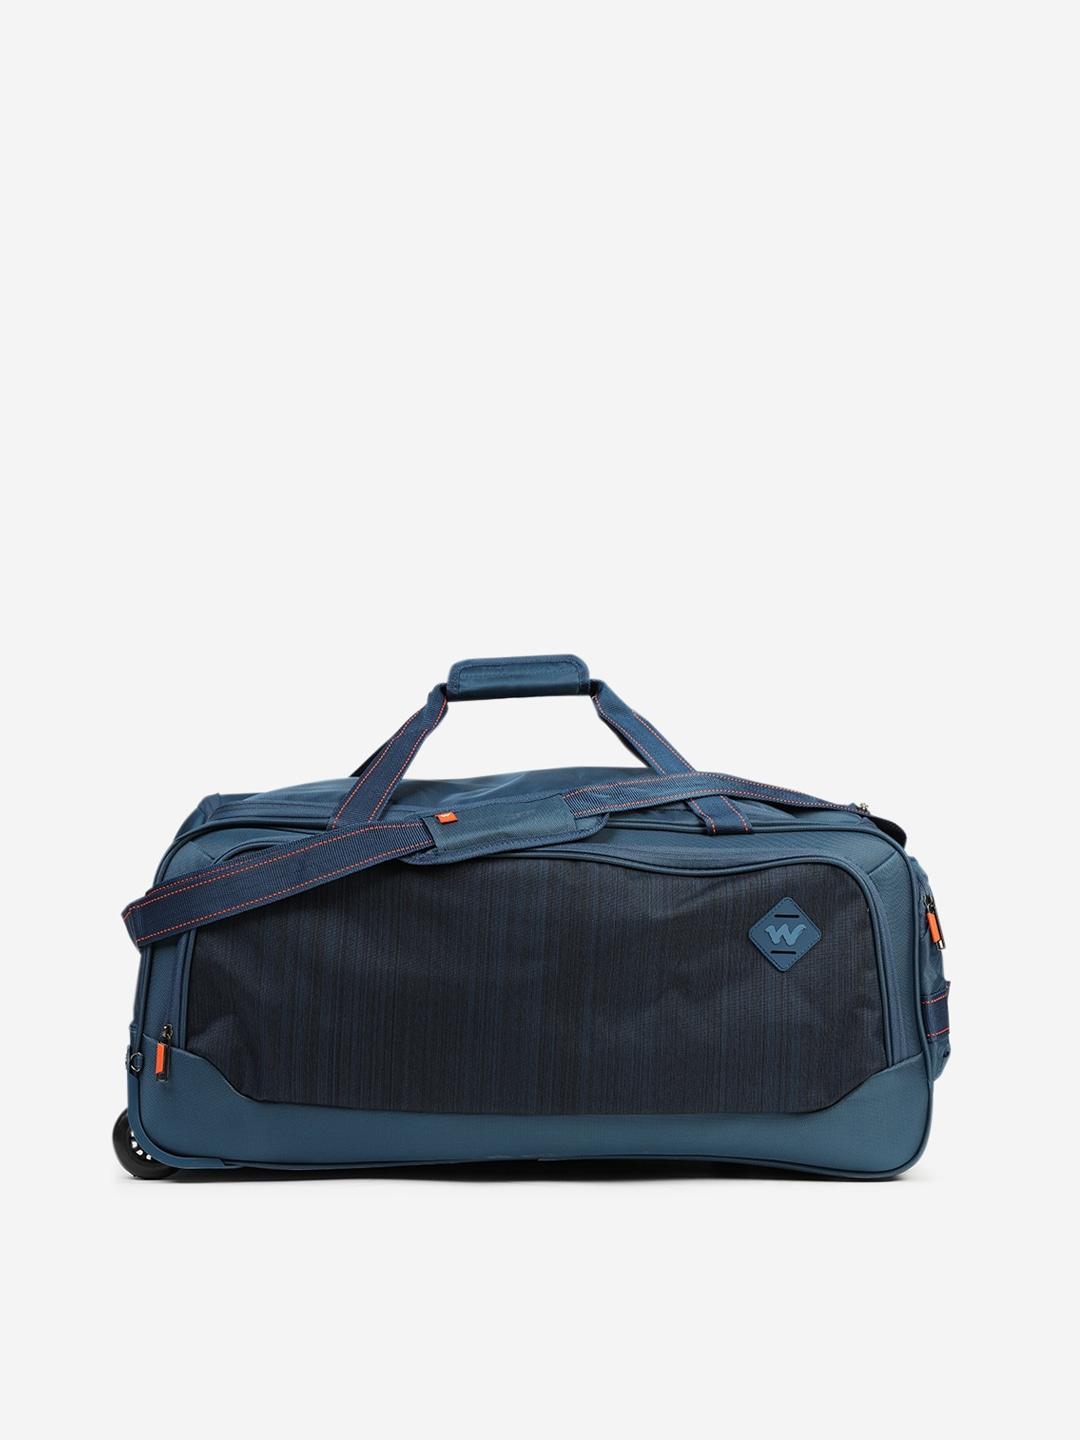 wildcraft navy blue & teal colourblocked trolley bags